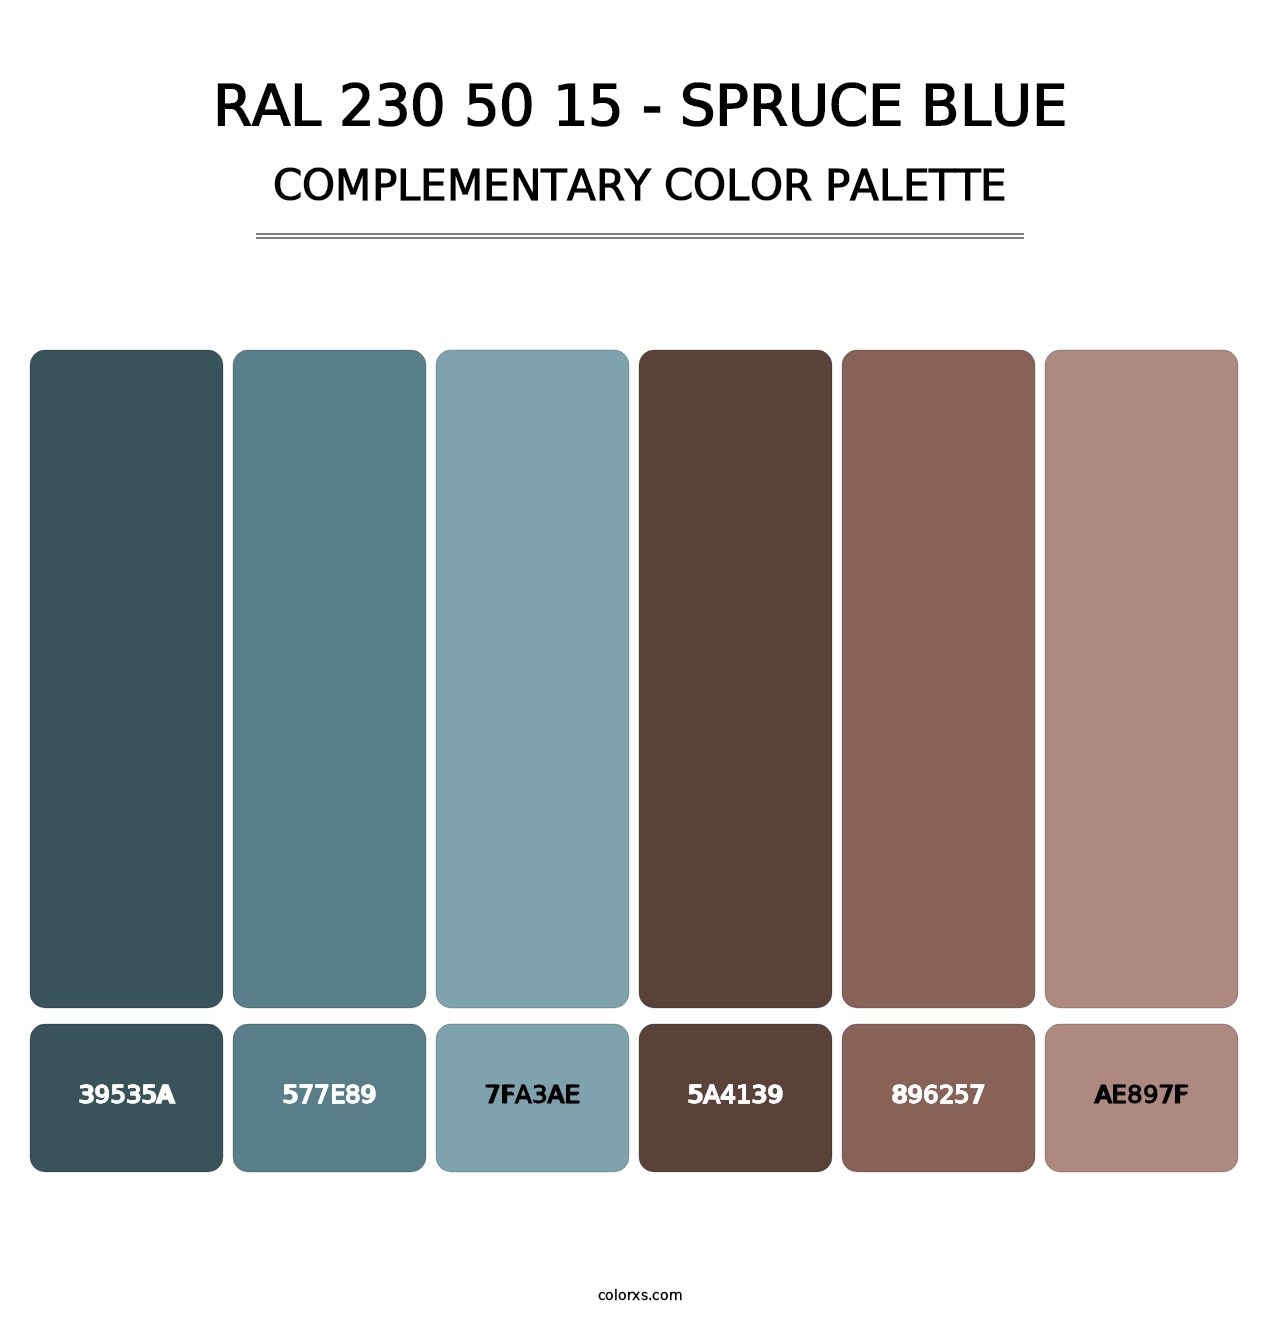 RAL 230 50 15 - Spruce Blue - Complementary Color Palette